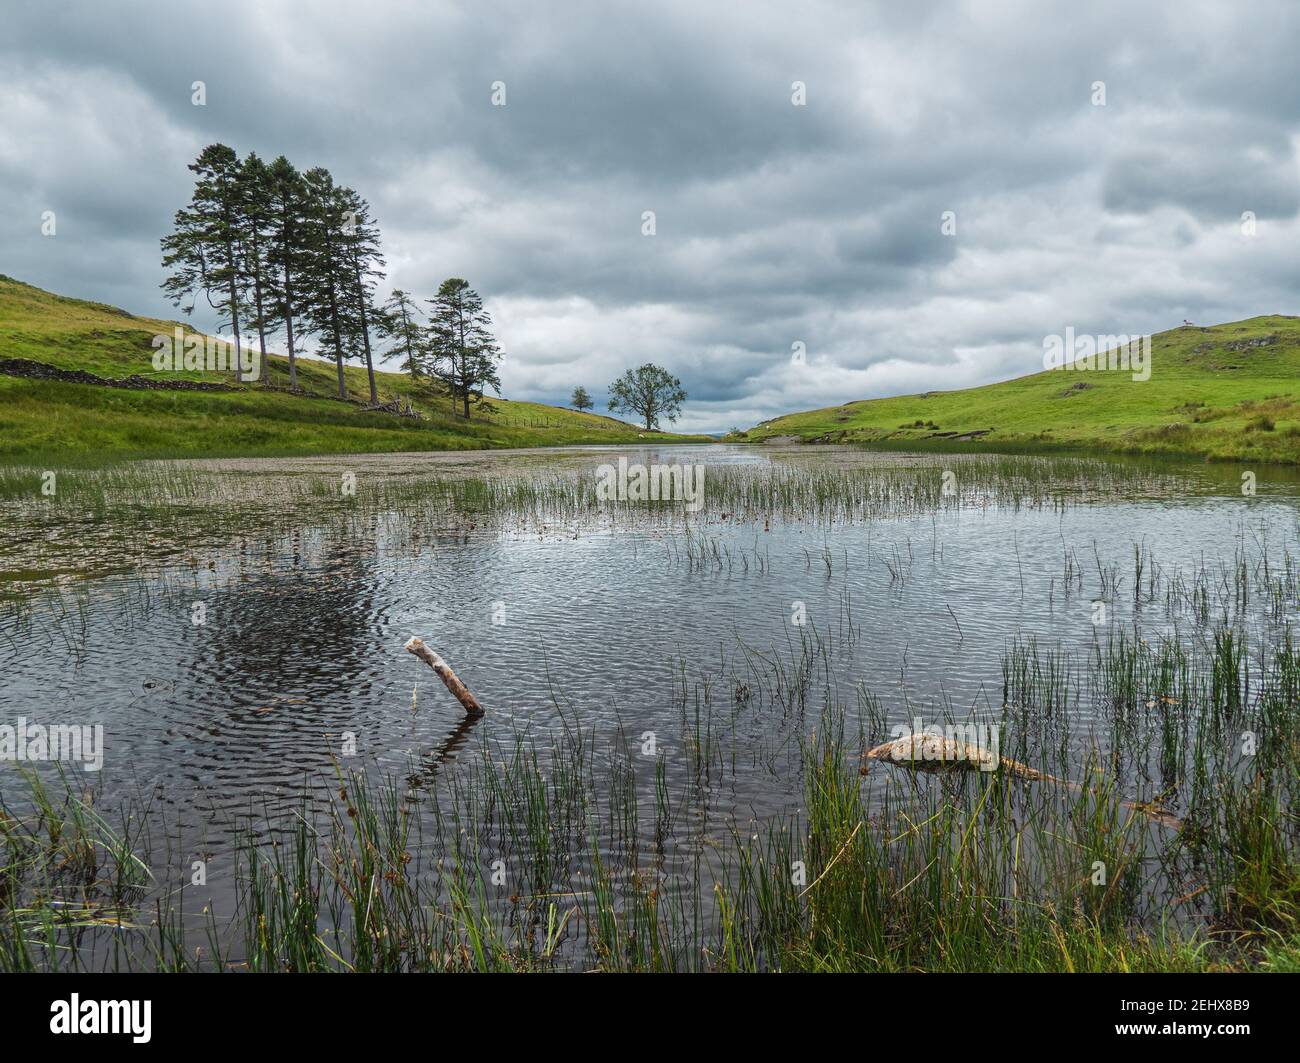 School Knot Tarn: a small reedy body of water in the English Lake District Stock Photo